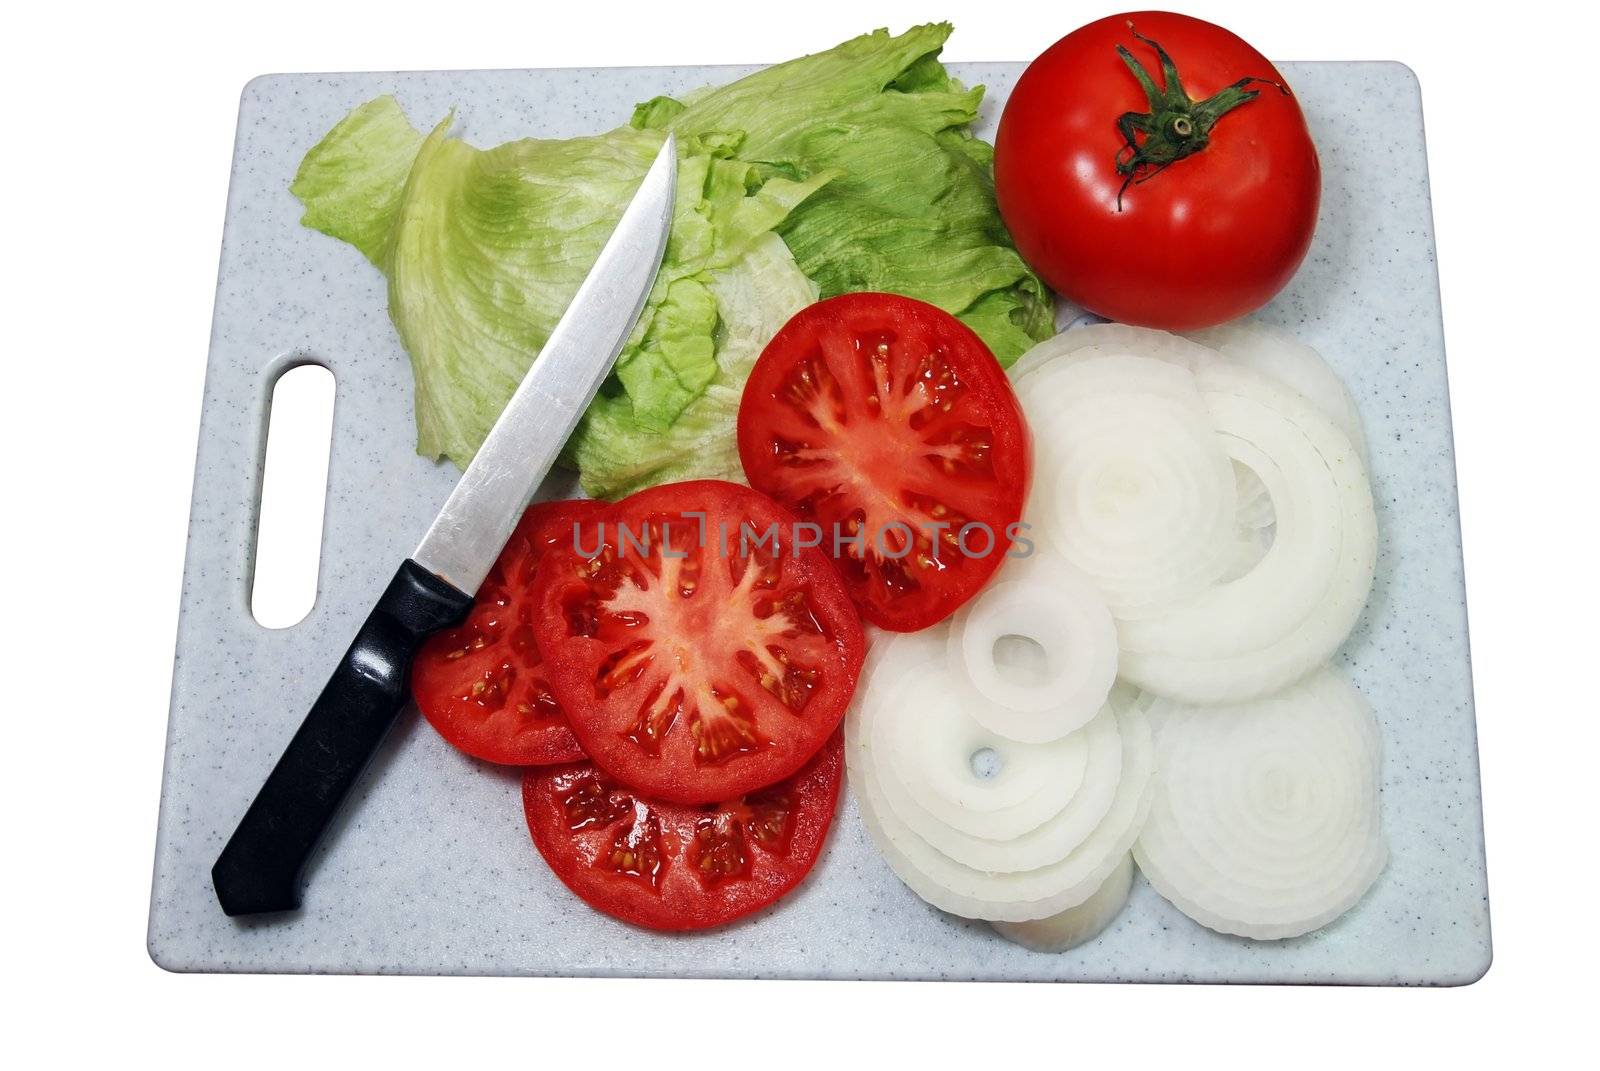 Tomato, Lettuce and Onions by dehooks